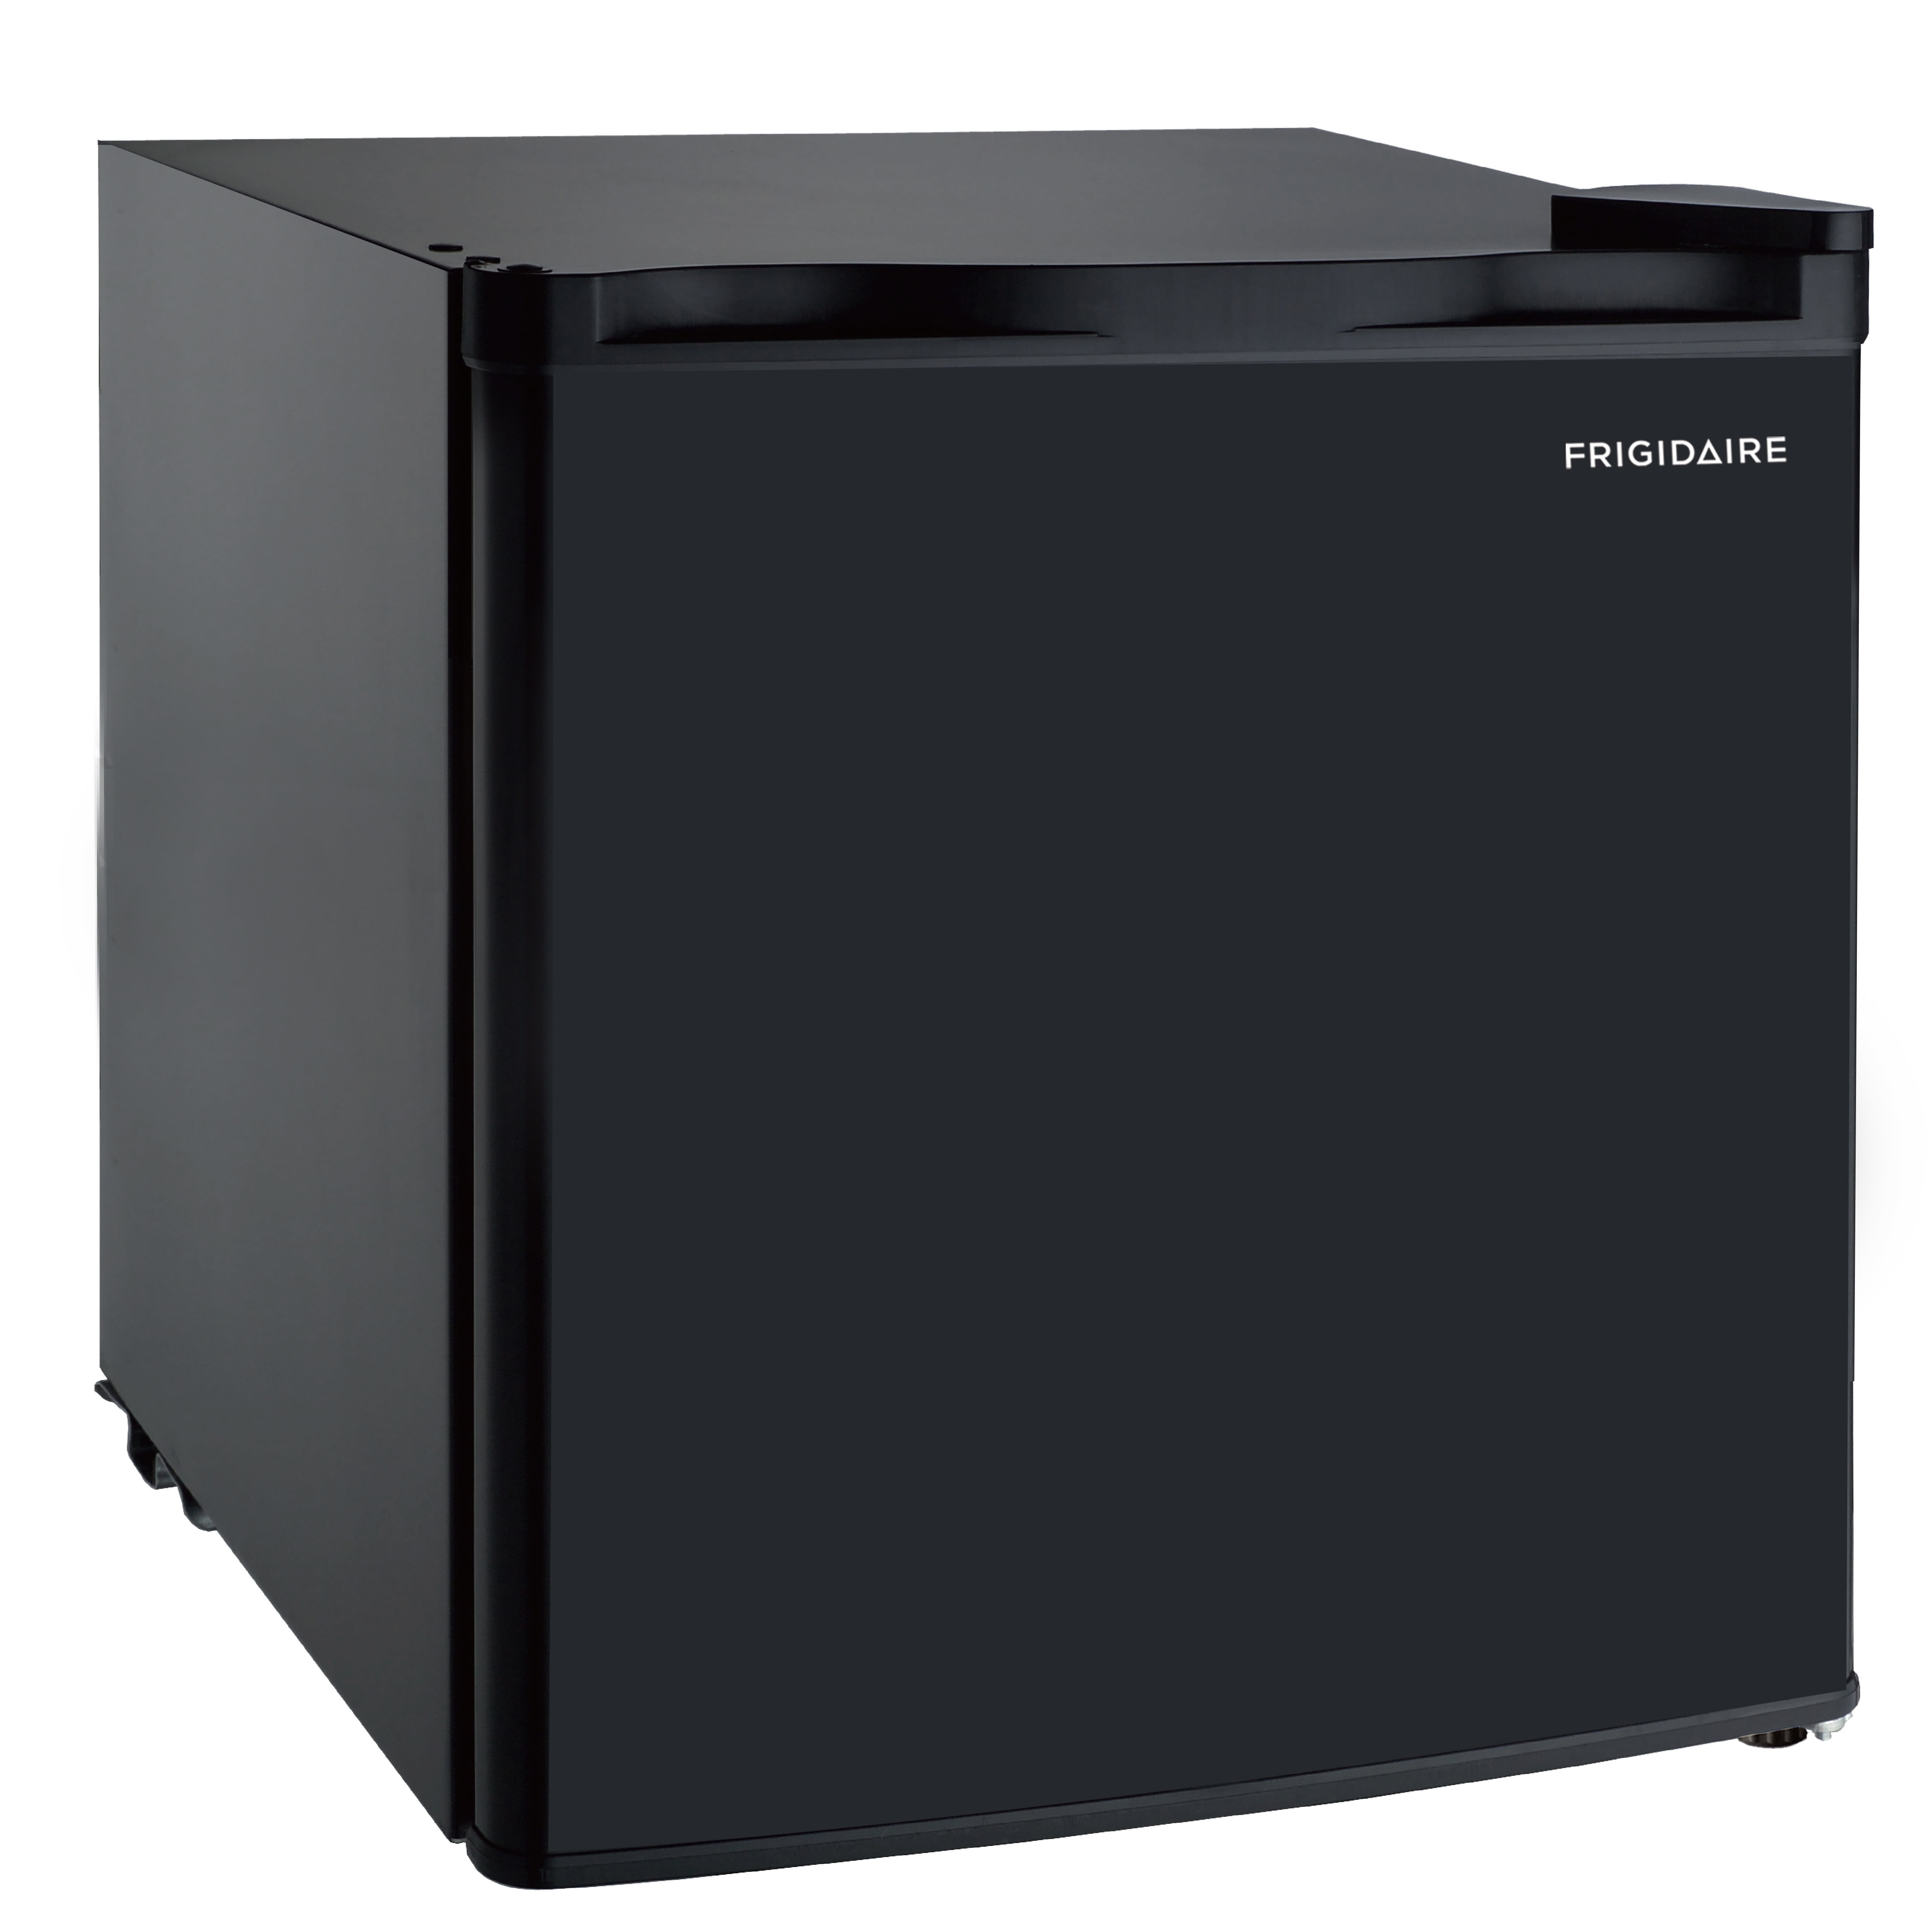 super cheap mini fridge, super cheap mini fridge Suppliers and